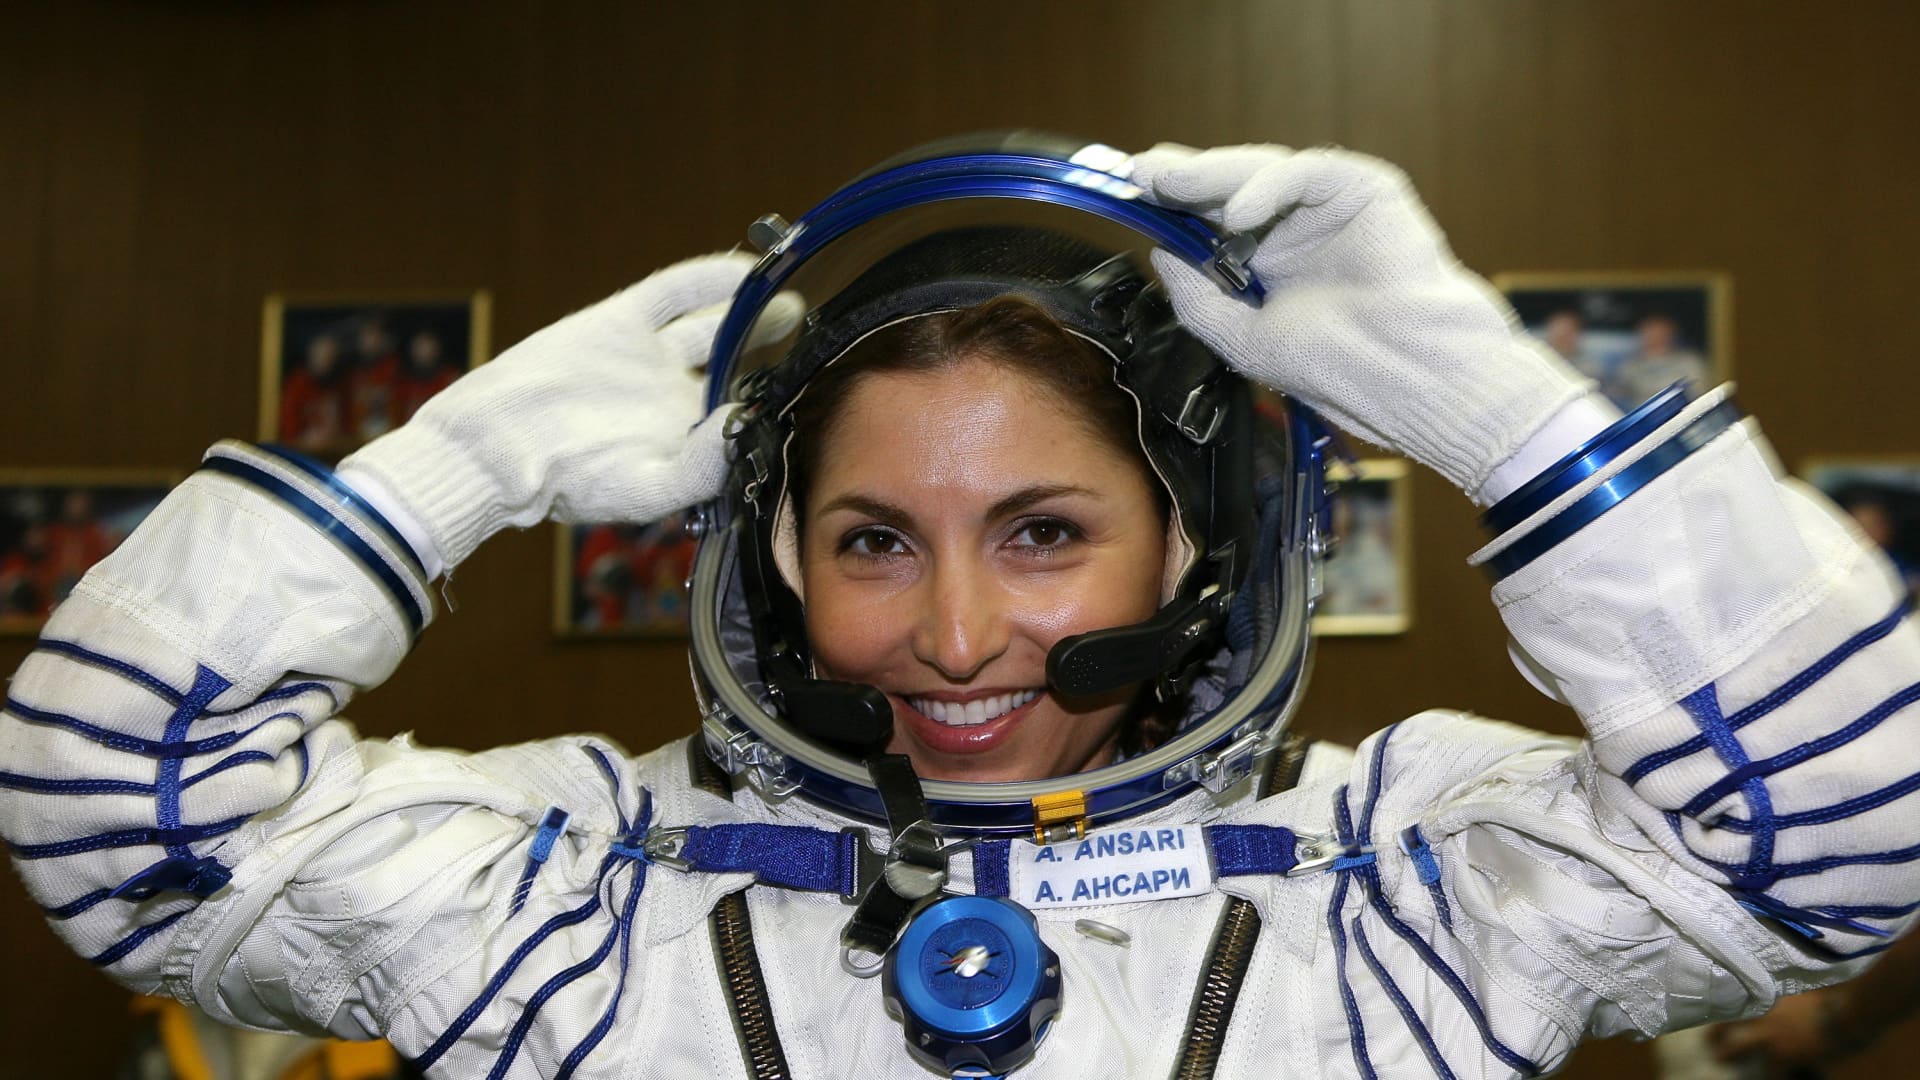 Space tourist Anousheh Ansari takes part in a training session at a Gagarin Cosmonaut Training Centre in Star City outside Moscow, Russia. Ansari blasted off on September 18, 2006 from Kazakhstan on a flight to the international space station, the Iranian-born American, a telecommunications entrepreneur, was accompanied by a U.S.-Russian crew on the Soyuz TMA-9 capsule.